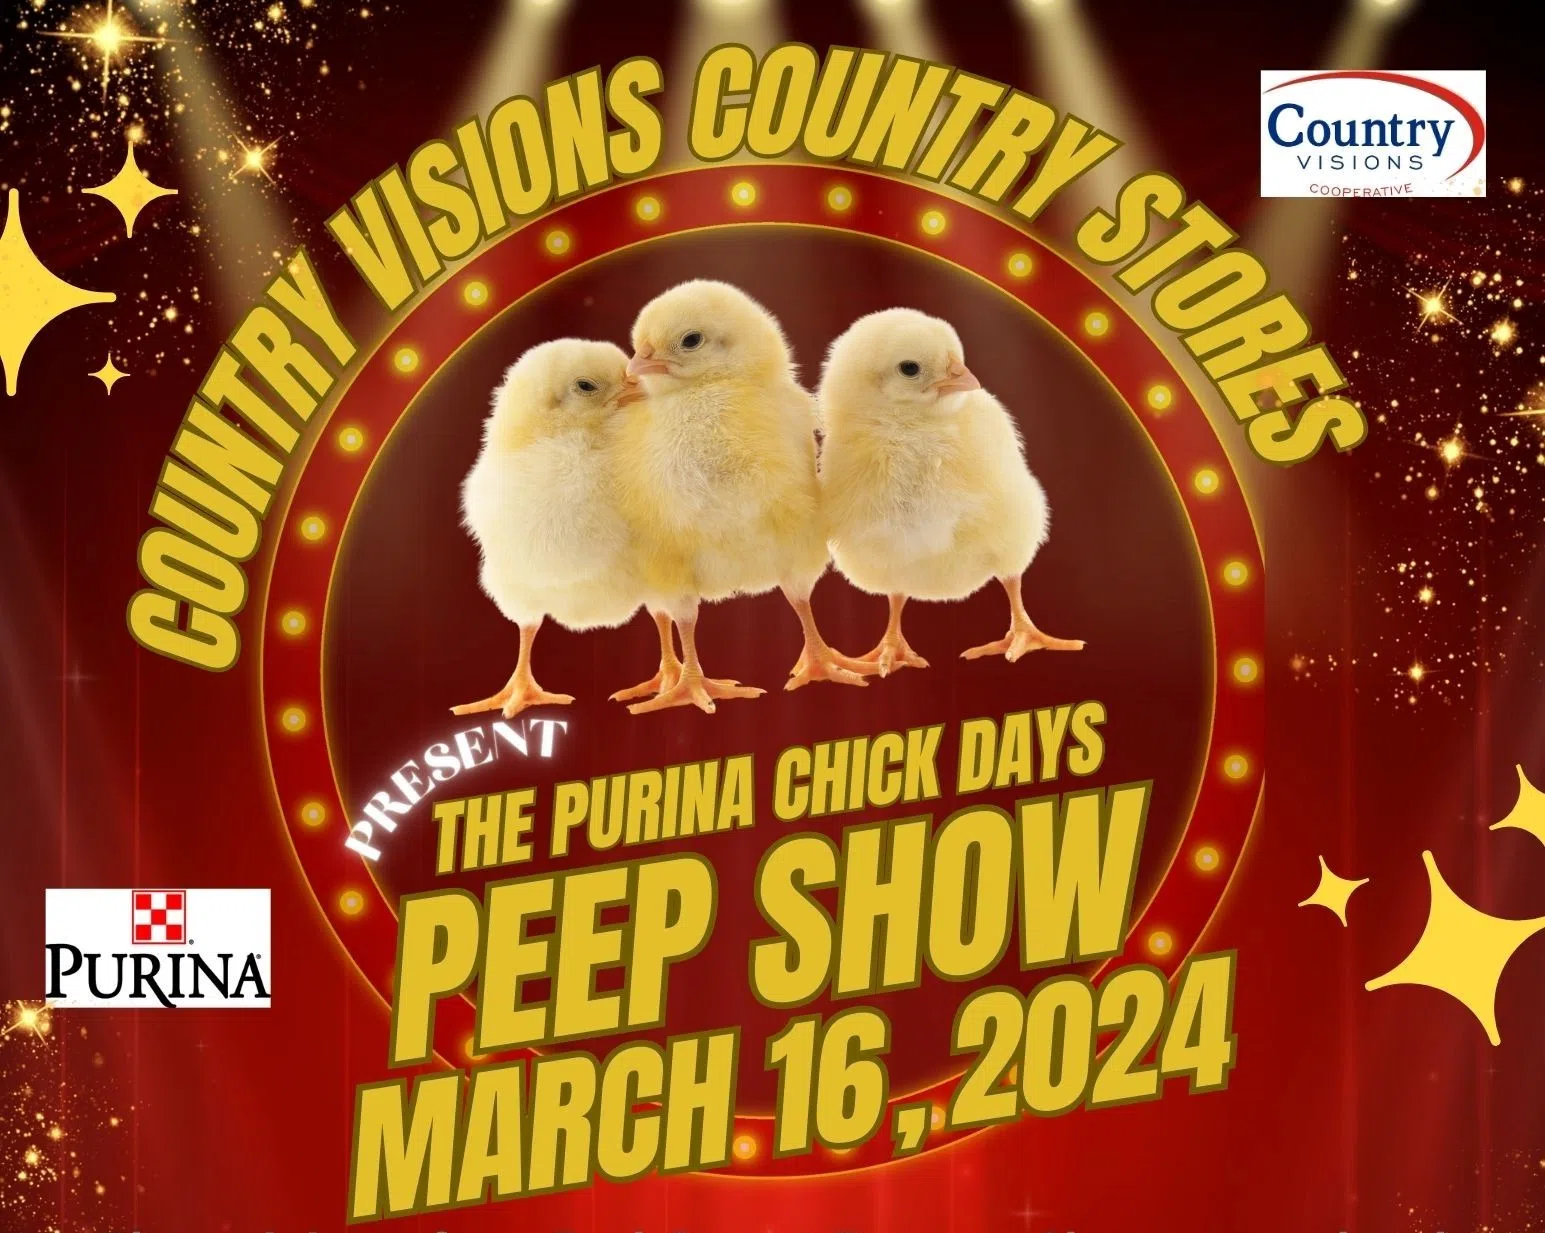 Country Visions Co-op Hosting Baby Chick Show